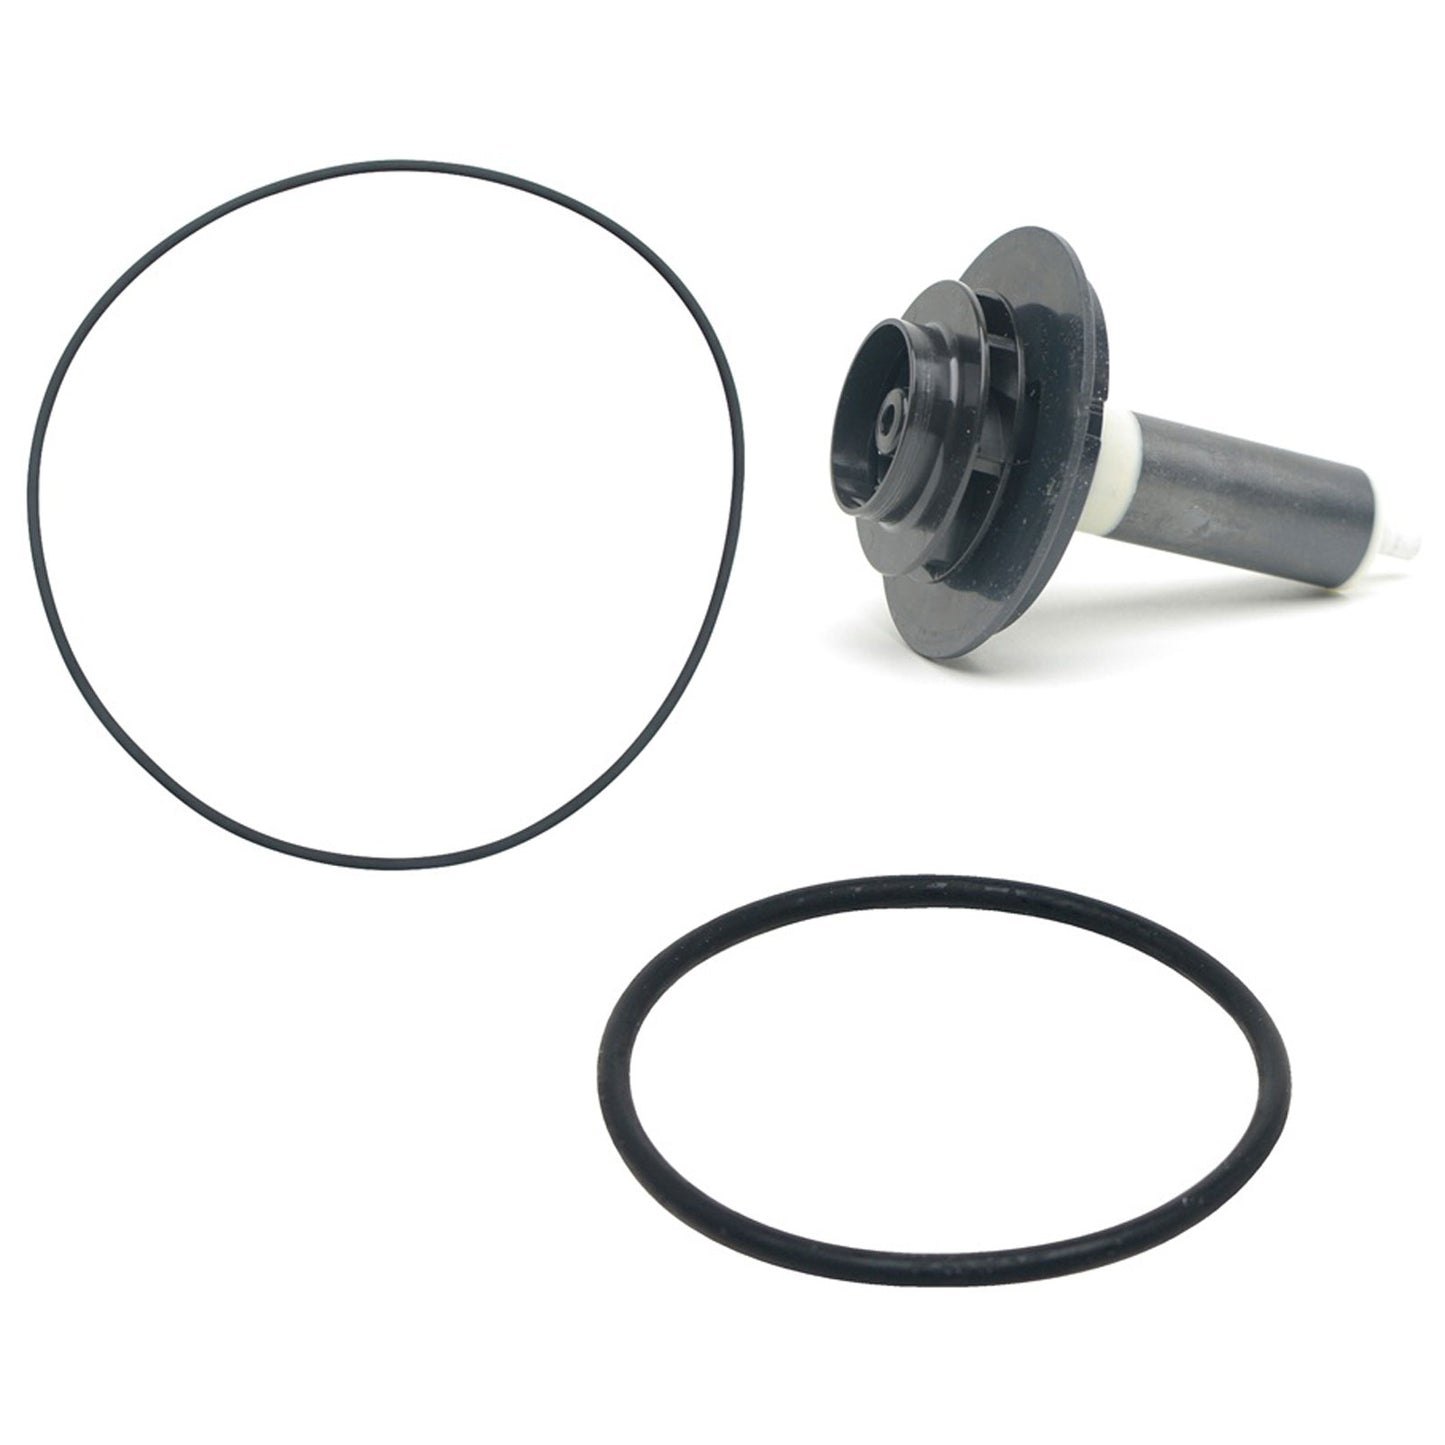 Fluval FX5 & FX6 Service Kit - Impeller, Cover, Seal (A20206, A20207, A20210, Instructions)